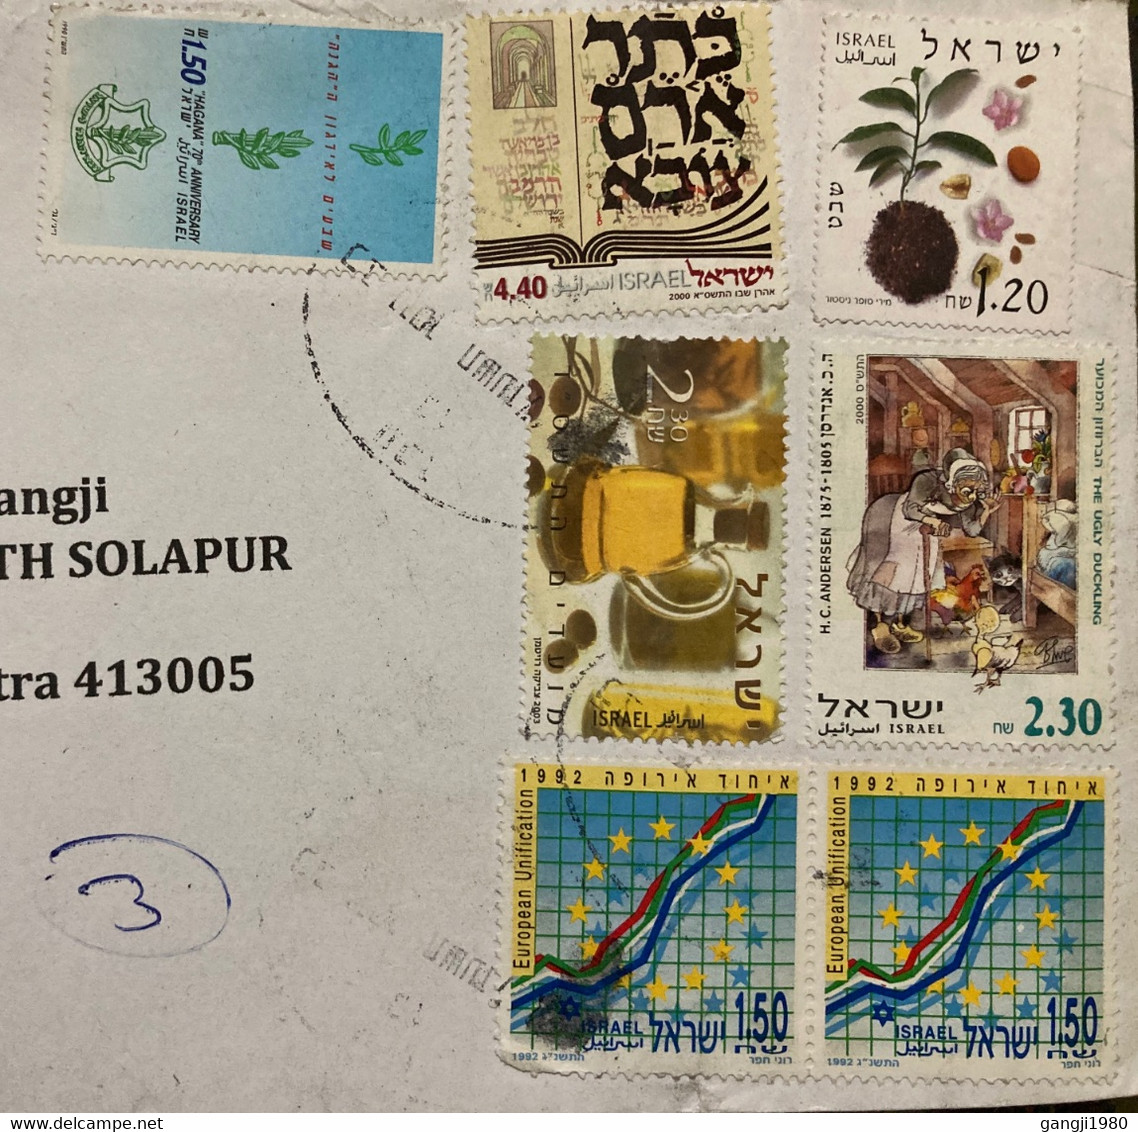 ISRAEL 1992, EUROPE UNIFICATION,OLD WOMEN,DUCK ,PLANT ,HAGNA ART ,JUG ,BOTTLE,7 STAMPS ,REGISTER,AIRMAIL COVER TO INDIA - Covers & Documents